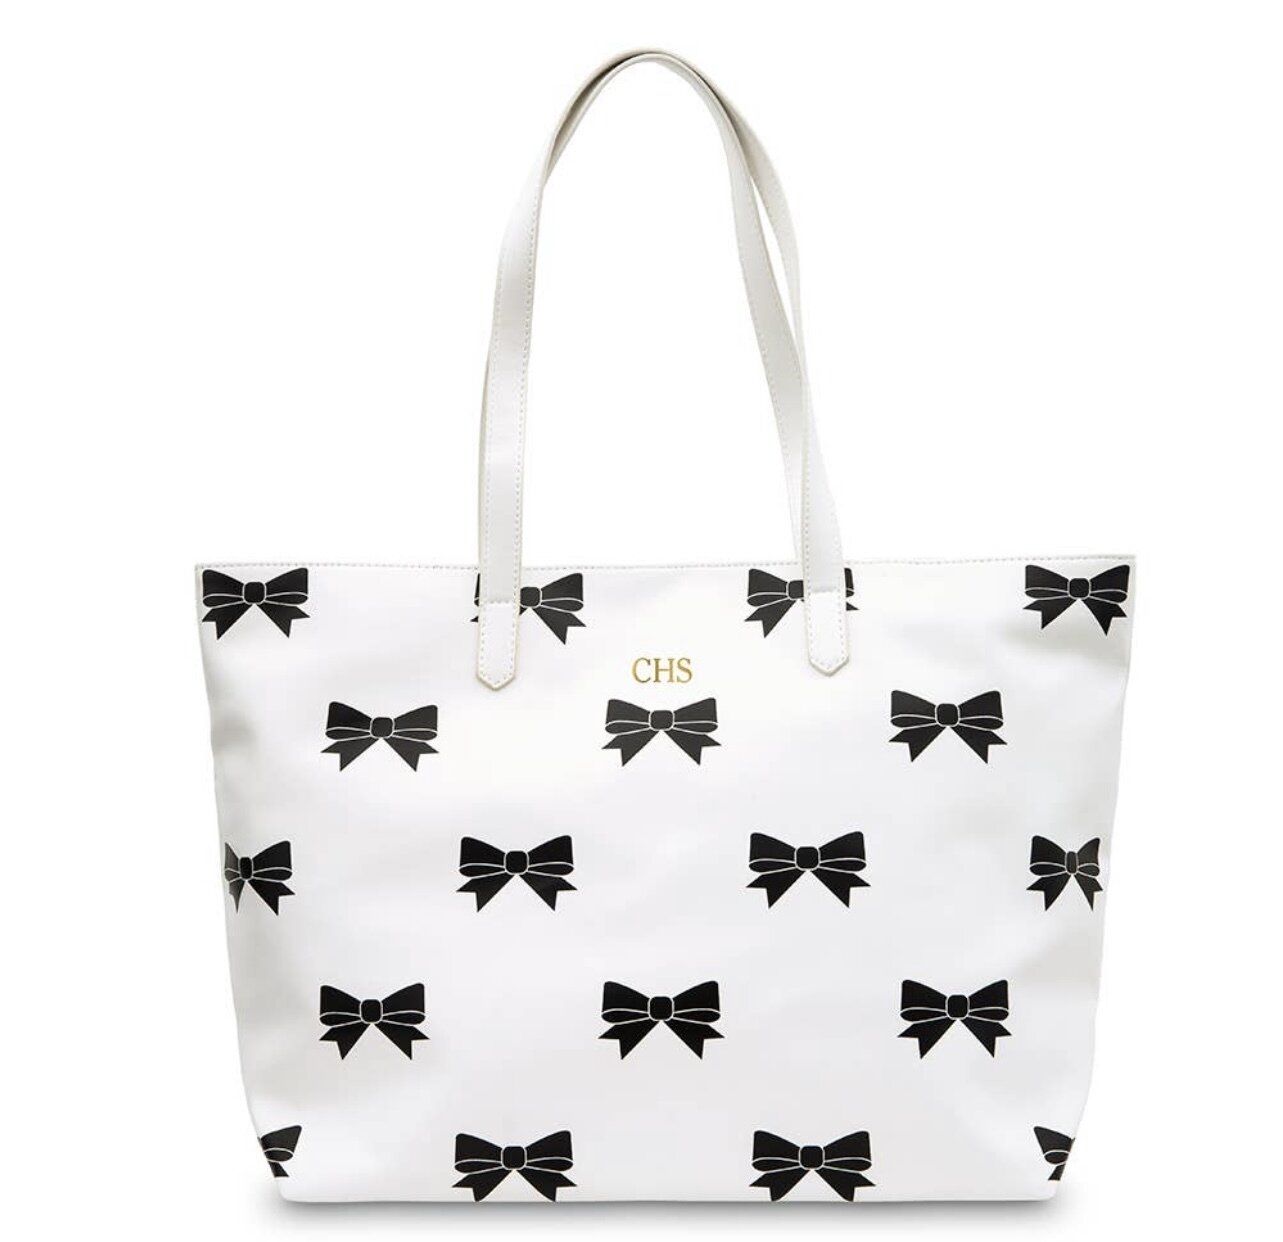 Large Patterned Faux Leather Tote Bag - Black Bows